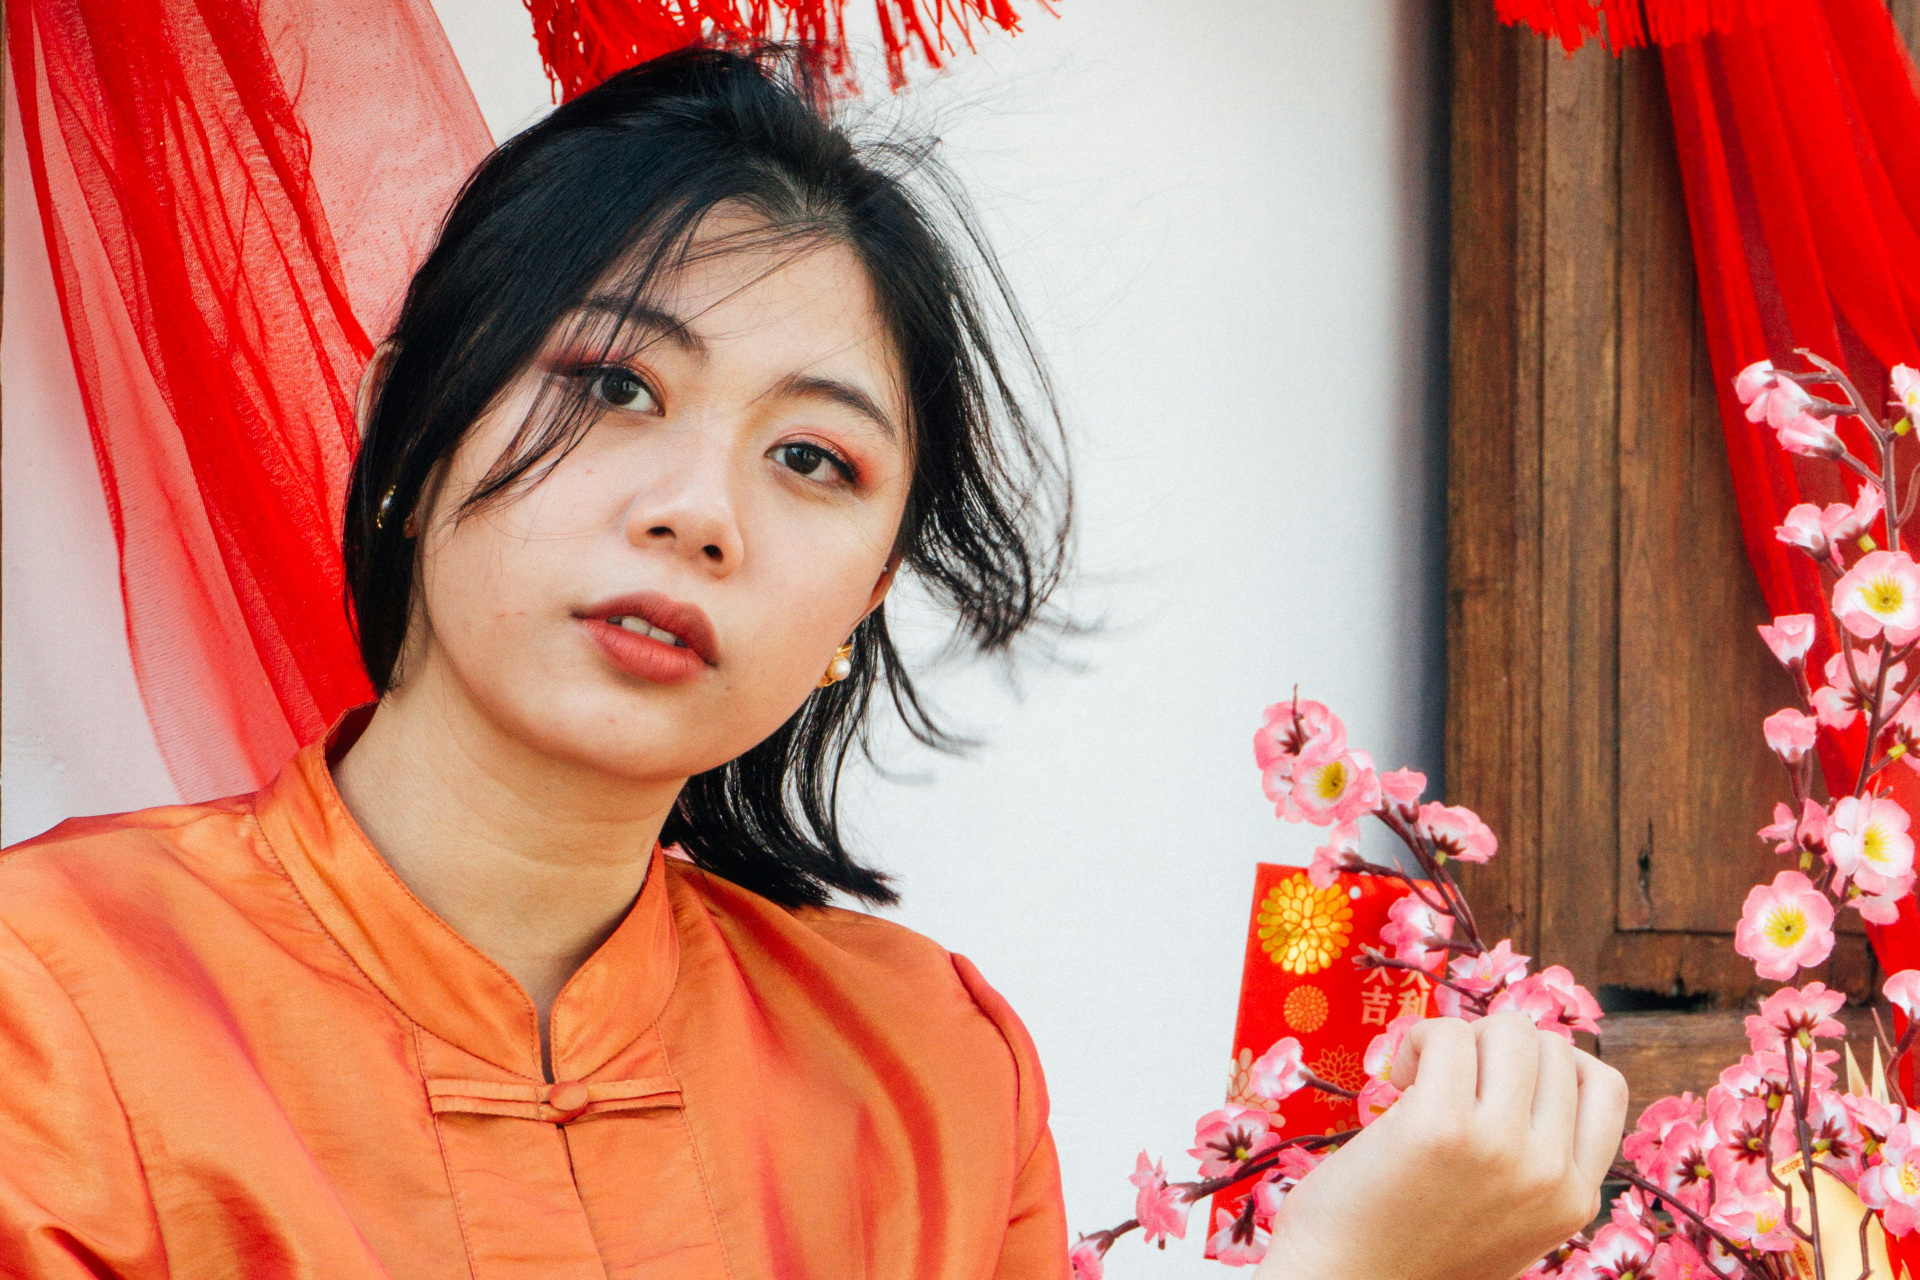 How To Celebrate The Lunar New Year In Style: The Pre-Loved Fashion Guide